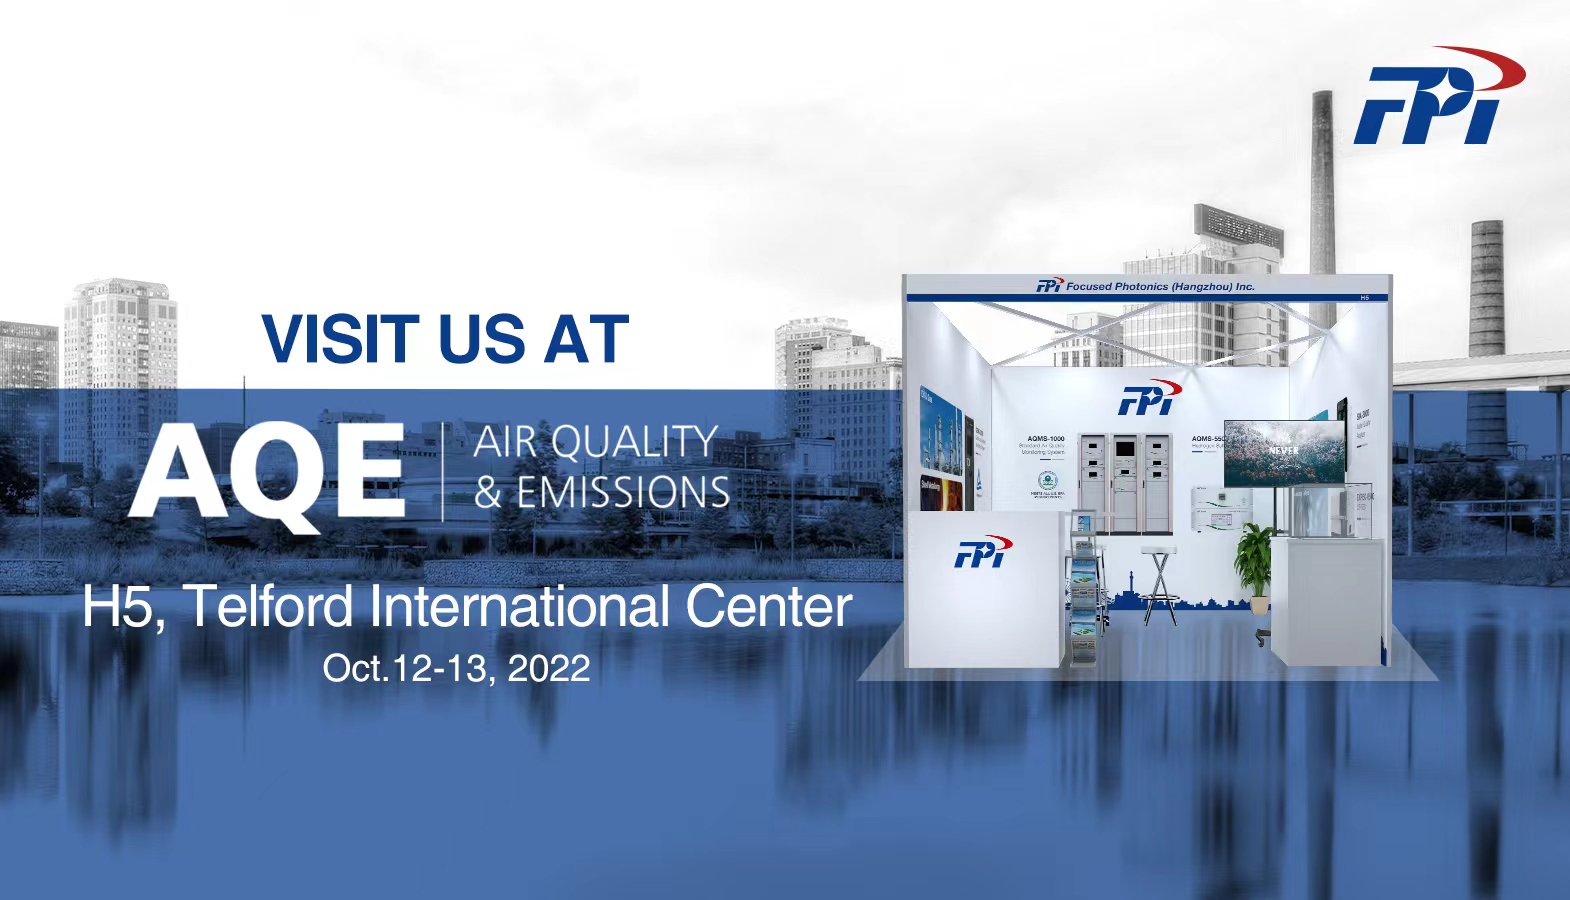 FPI at AQE Air Quality & Emissions Monitoring Exhibition in Telford, UK